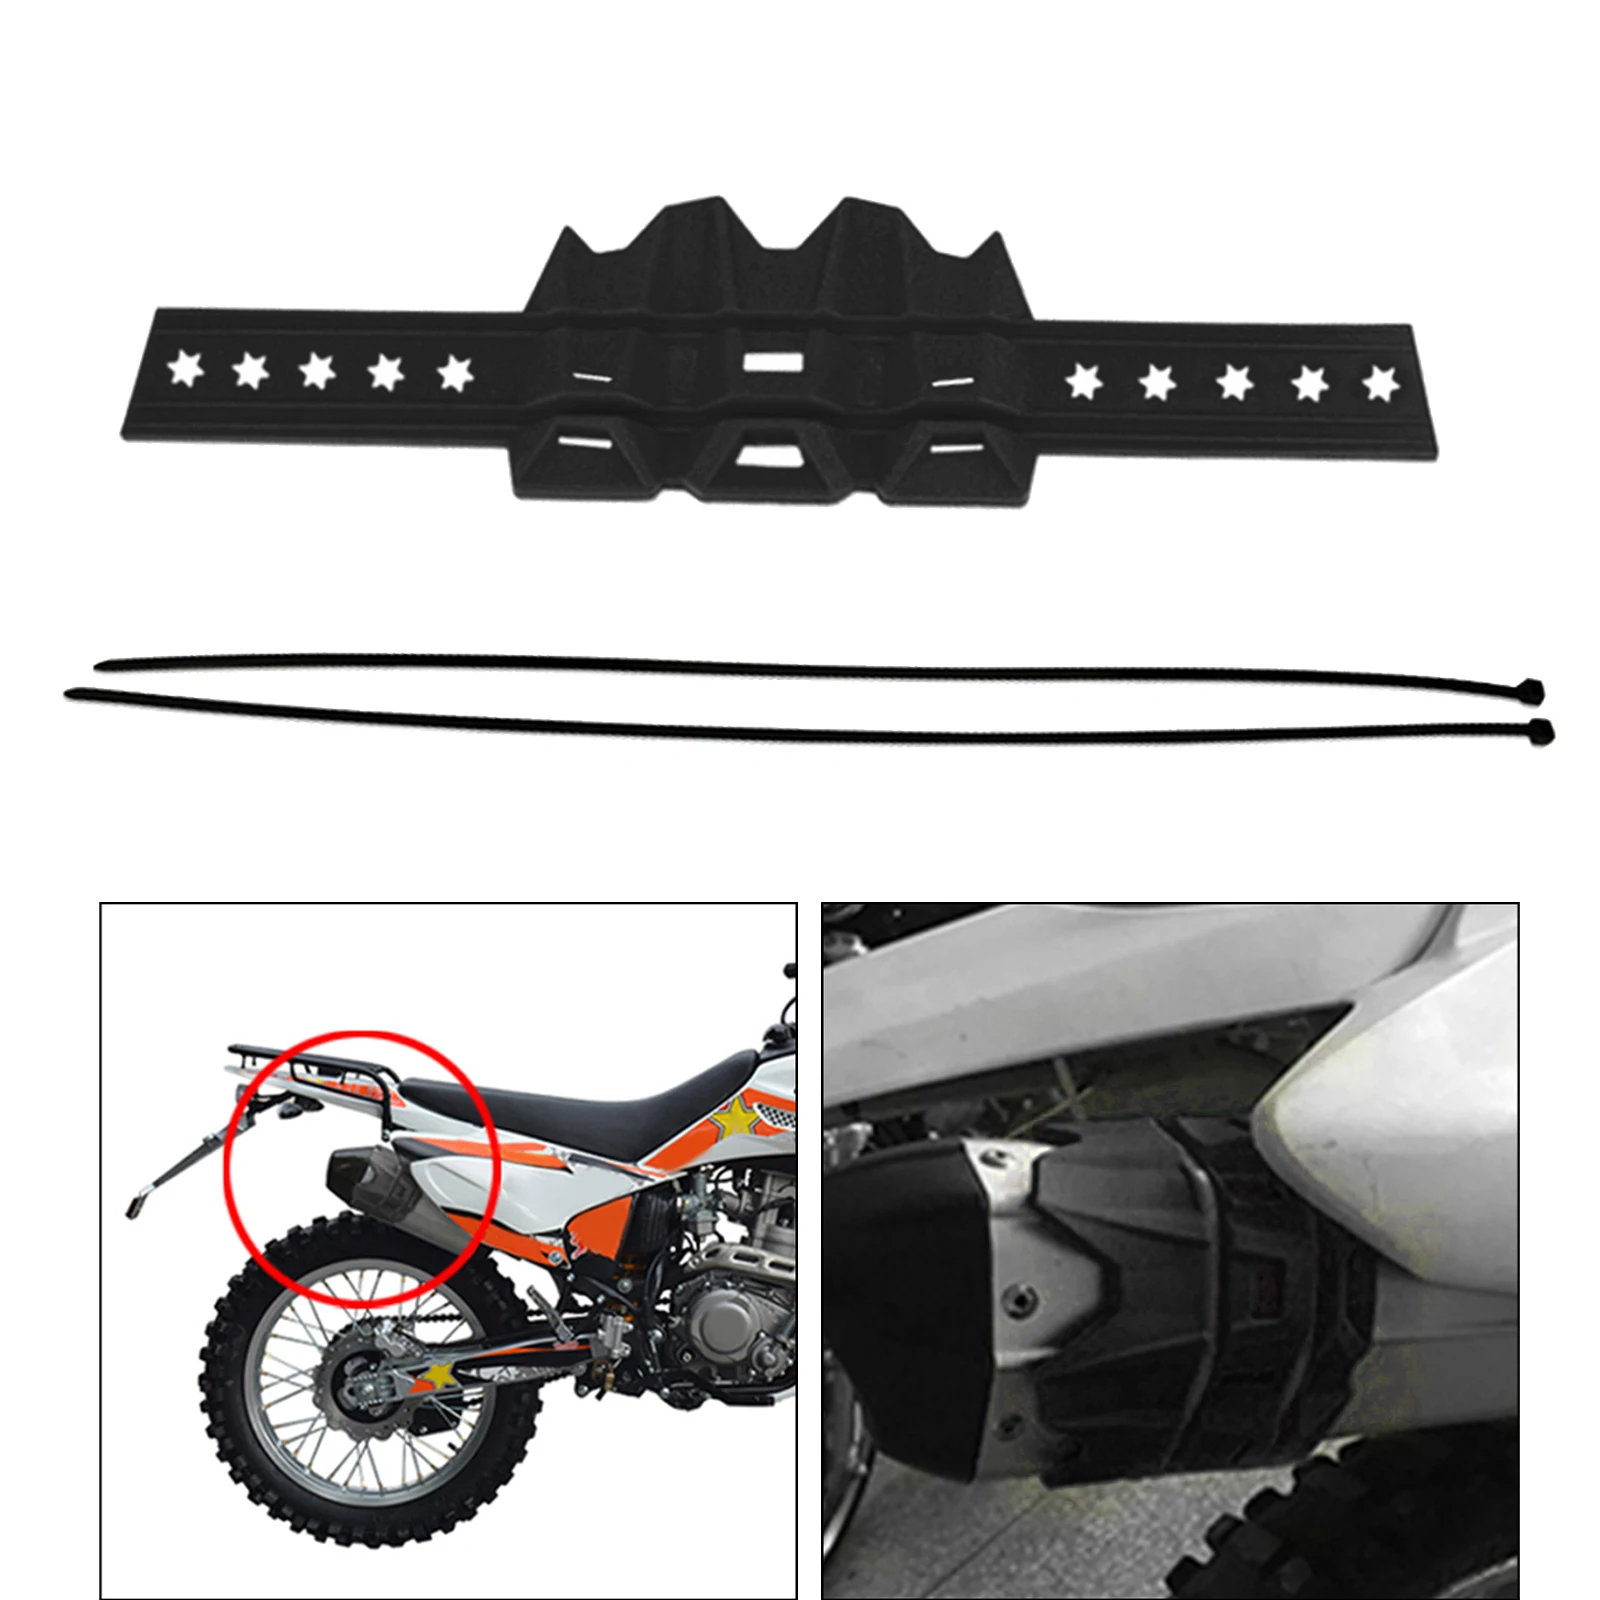 Black Exhaust Muffler Tailpipe Cover Guard Protector Universal for 2 Stroke 4 Stroke Motorcycle